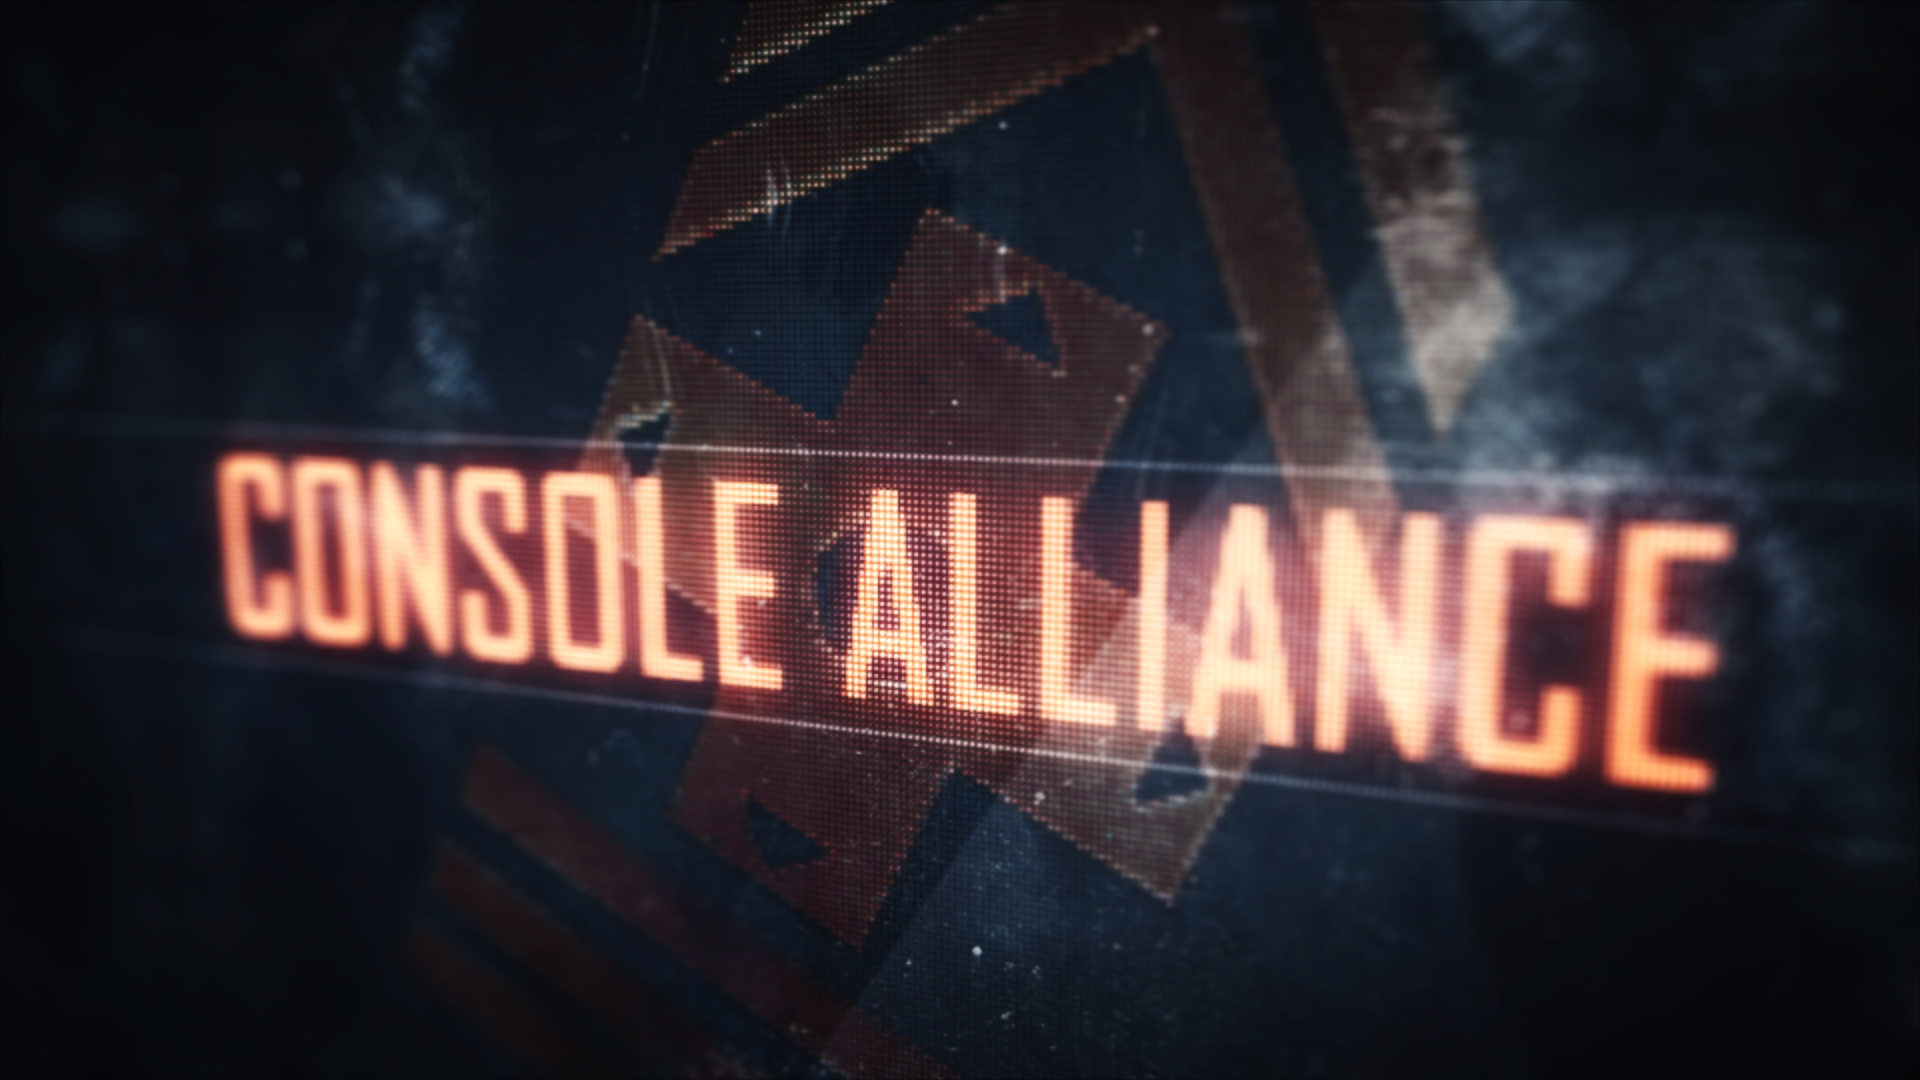 Console Alliance Video Games 1920x1080